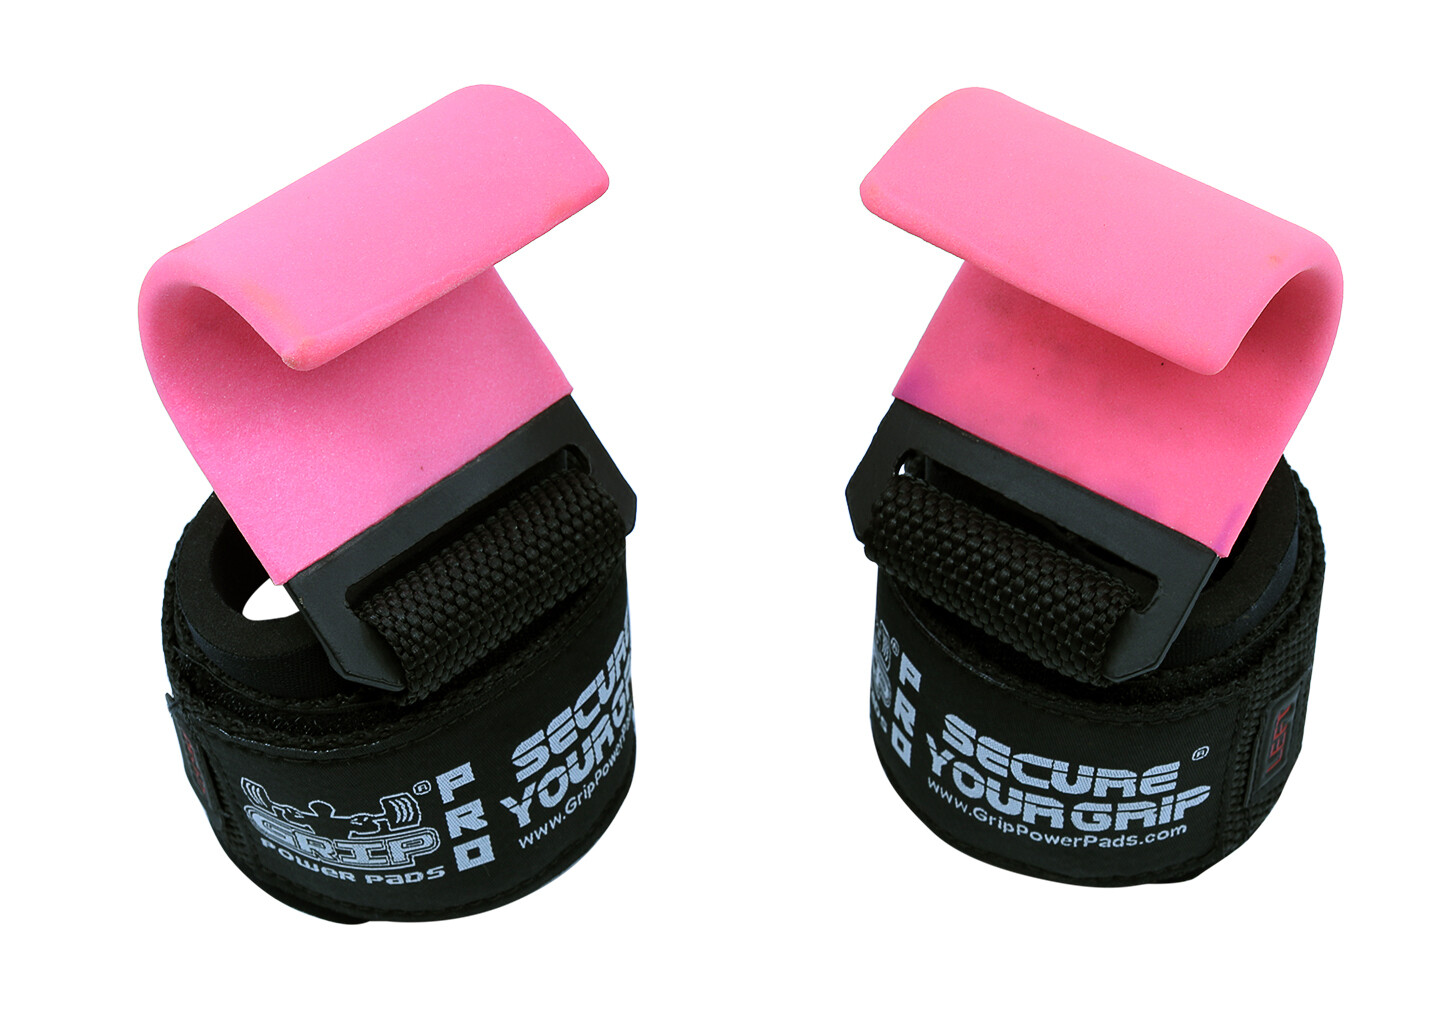 Lifting Hooks - Get Online Your Grip Power Pads 